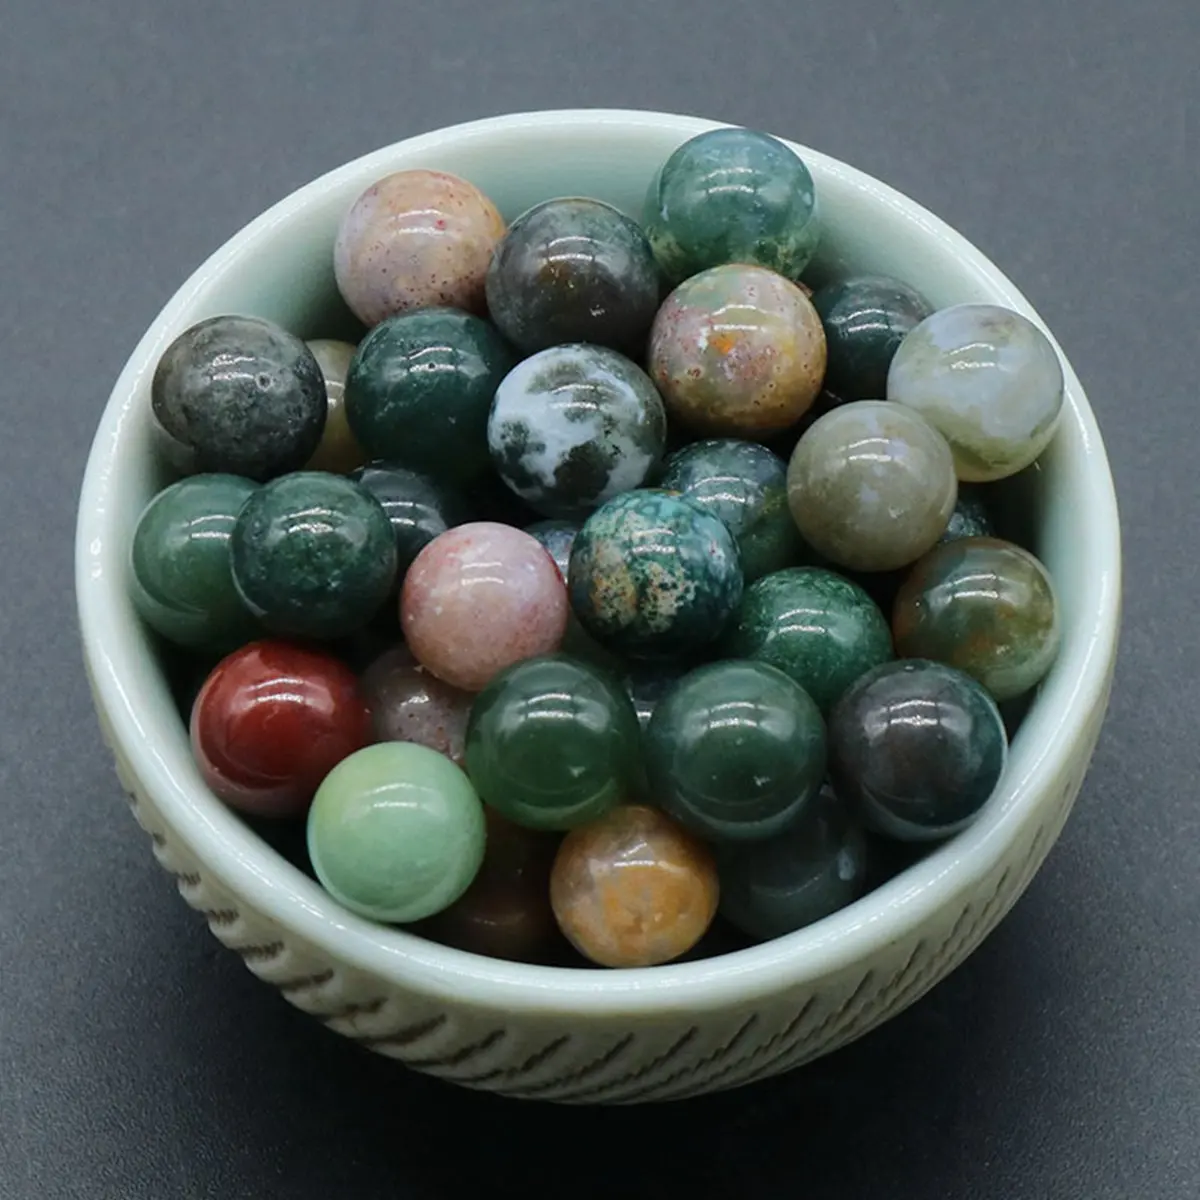 

16PCS 8MM Moss Agate Stress Relief Spheres & Balls Polished Meditation Balancing Home Decoration Crystal Beads